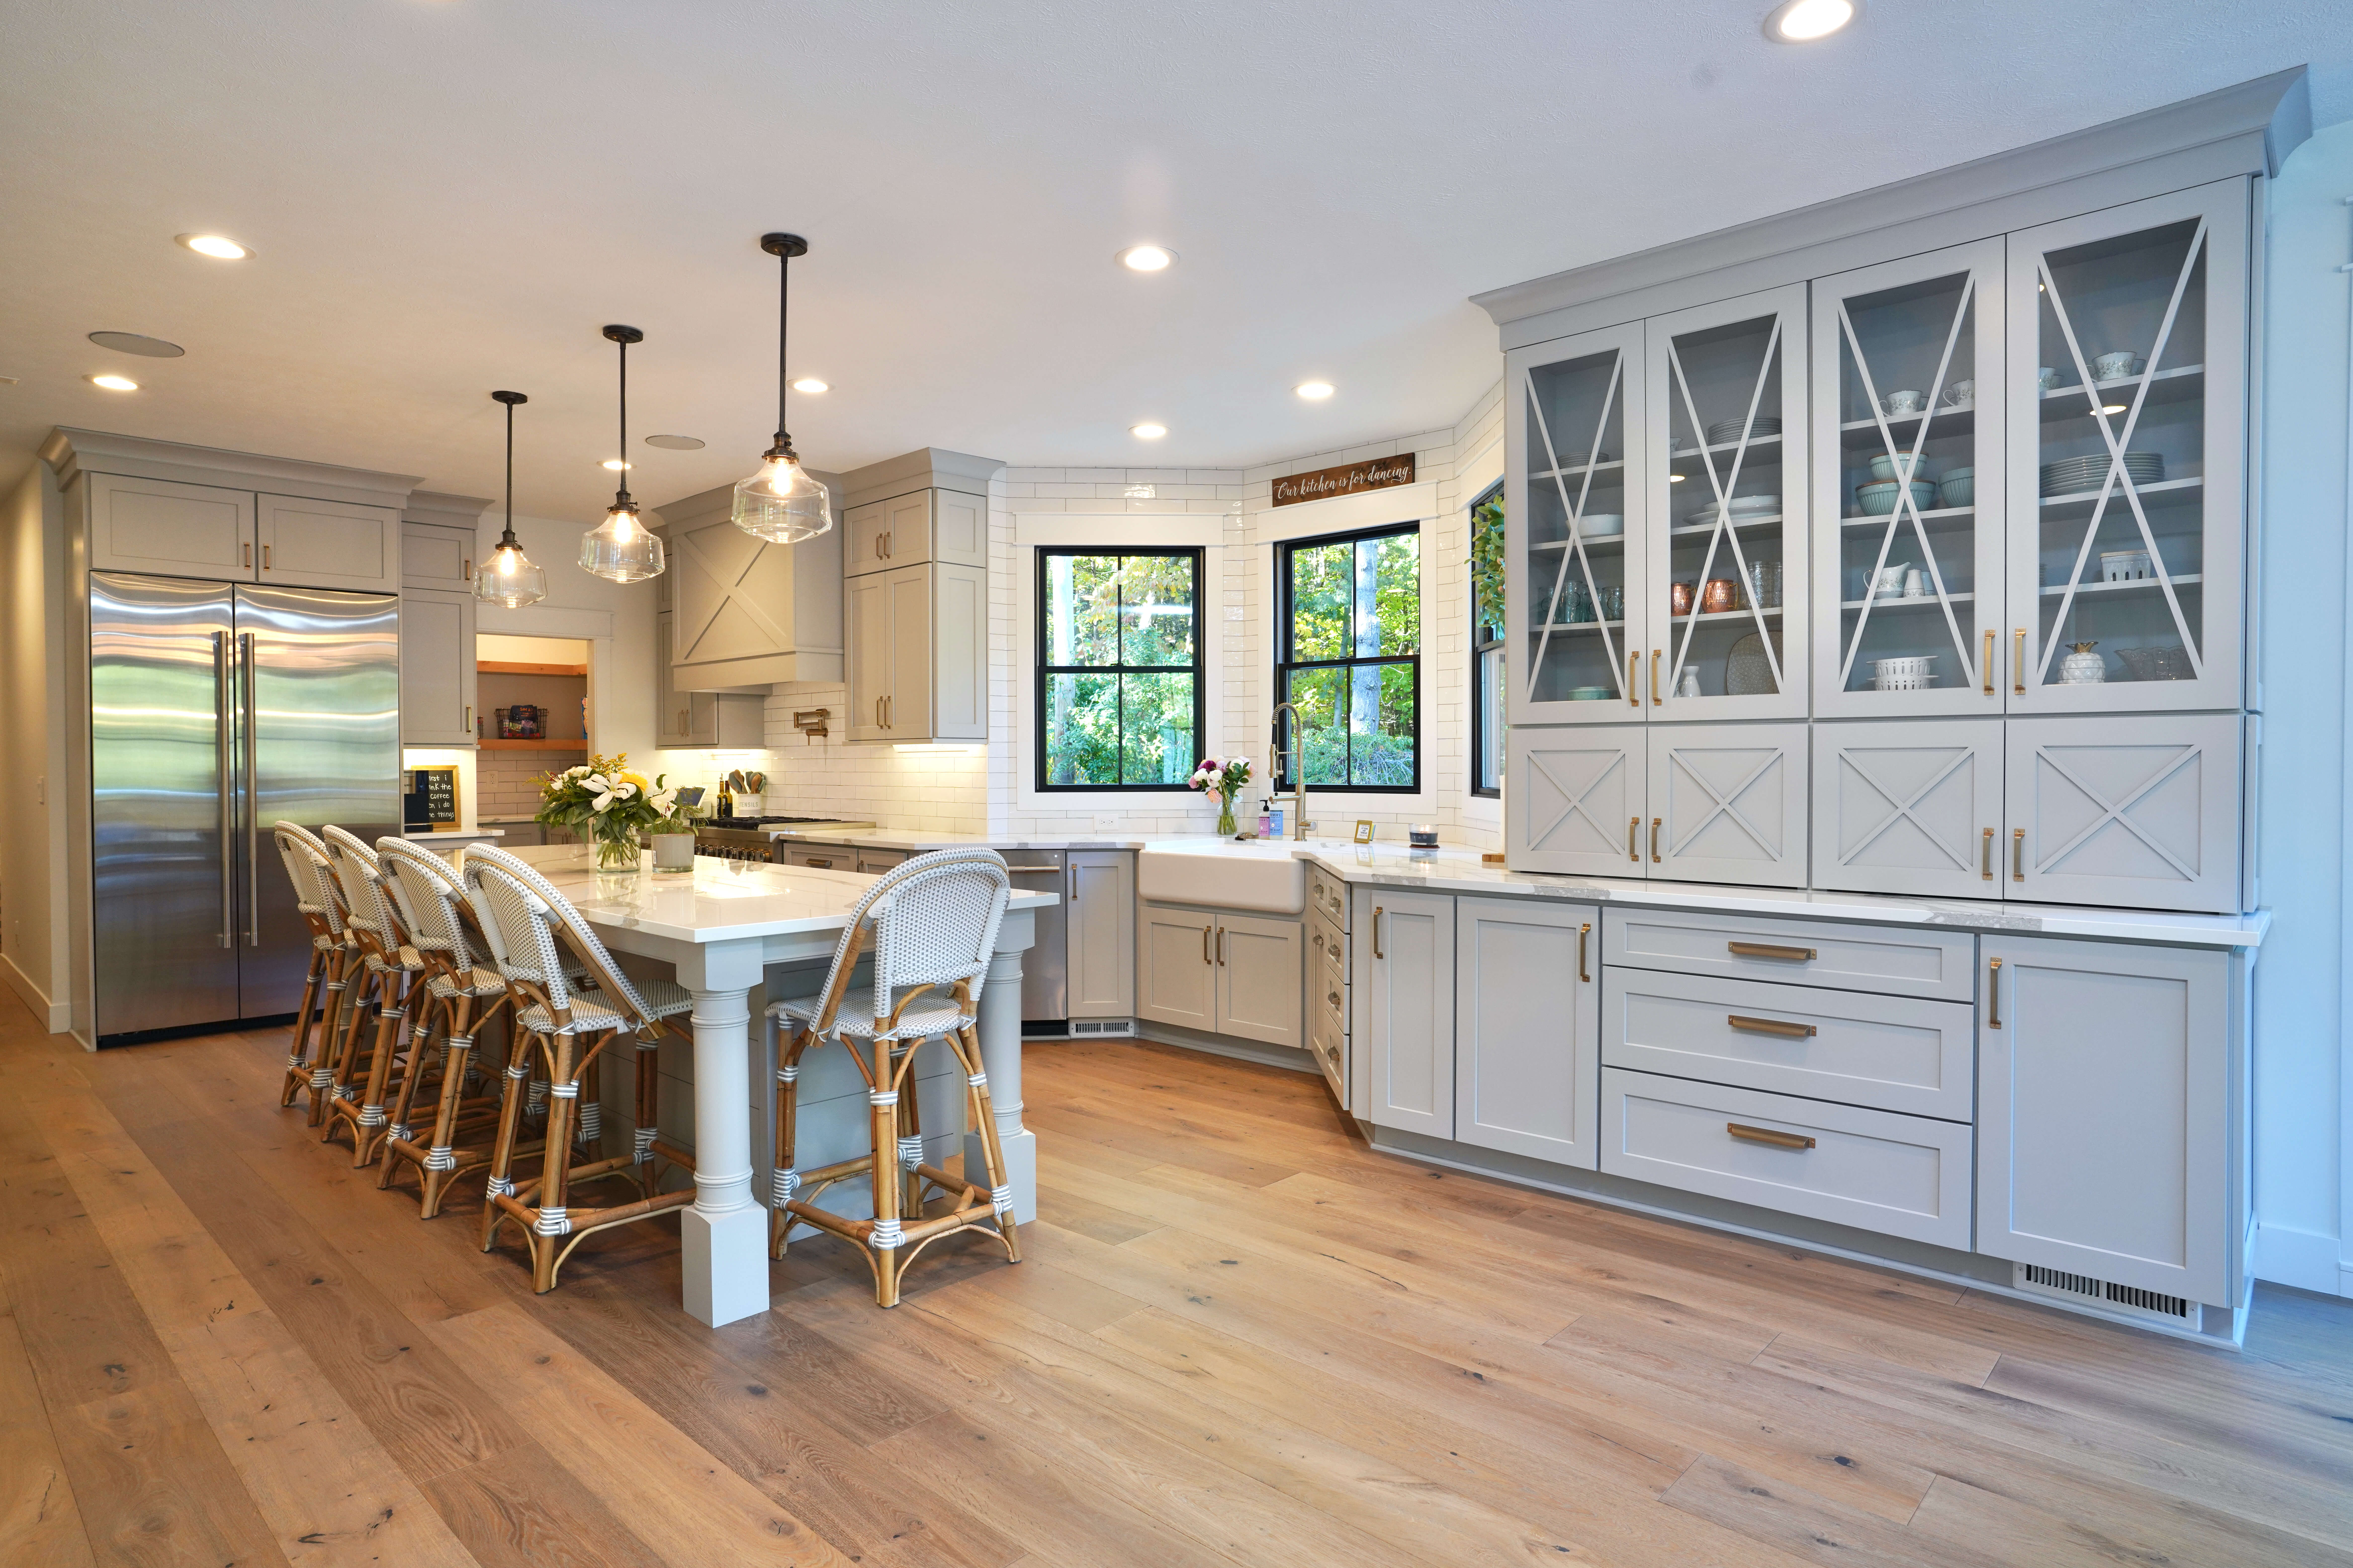 A beautiful kitchen with quality painted cabinetry from Dura Supreme Cabinetry in a light gray painted finish.